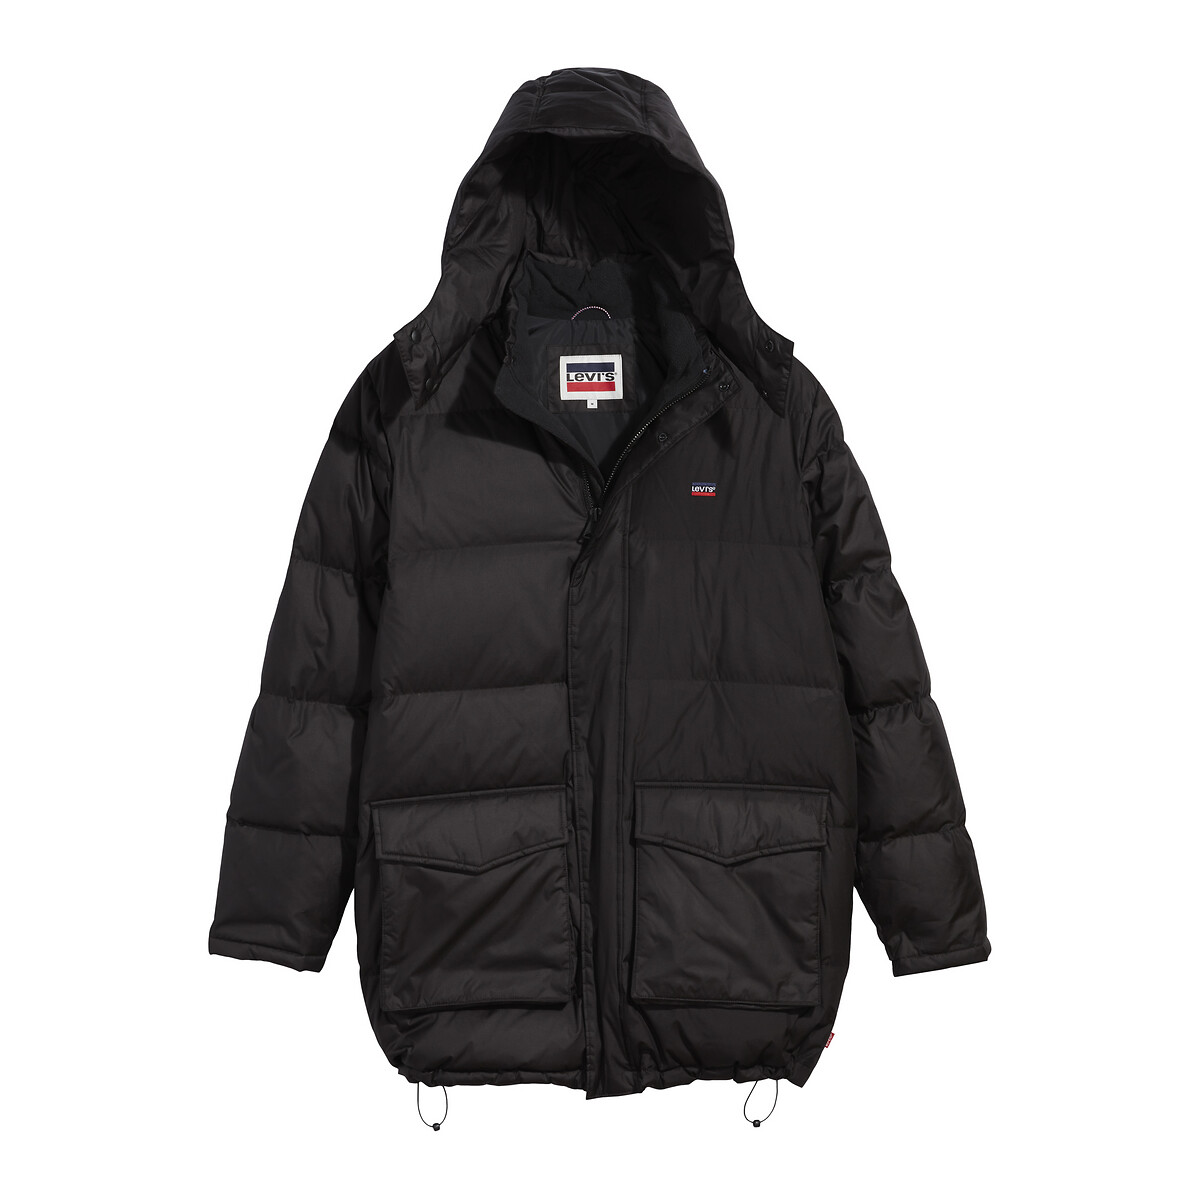 Esprit Mid Padded Jacket With Hood Offer Discounts, Save 45% 